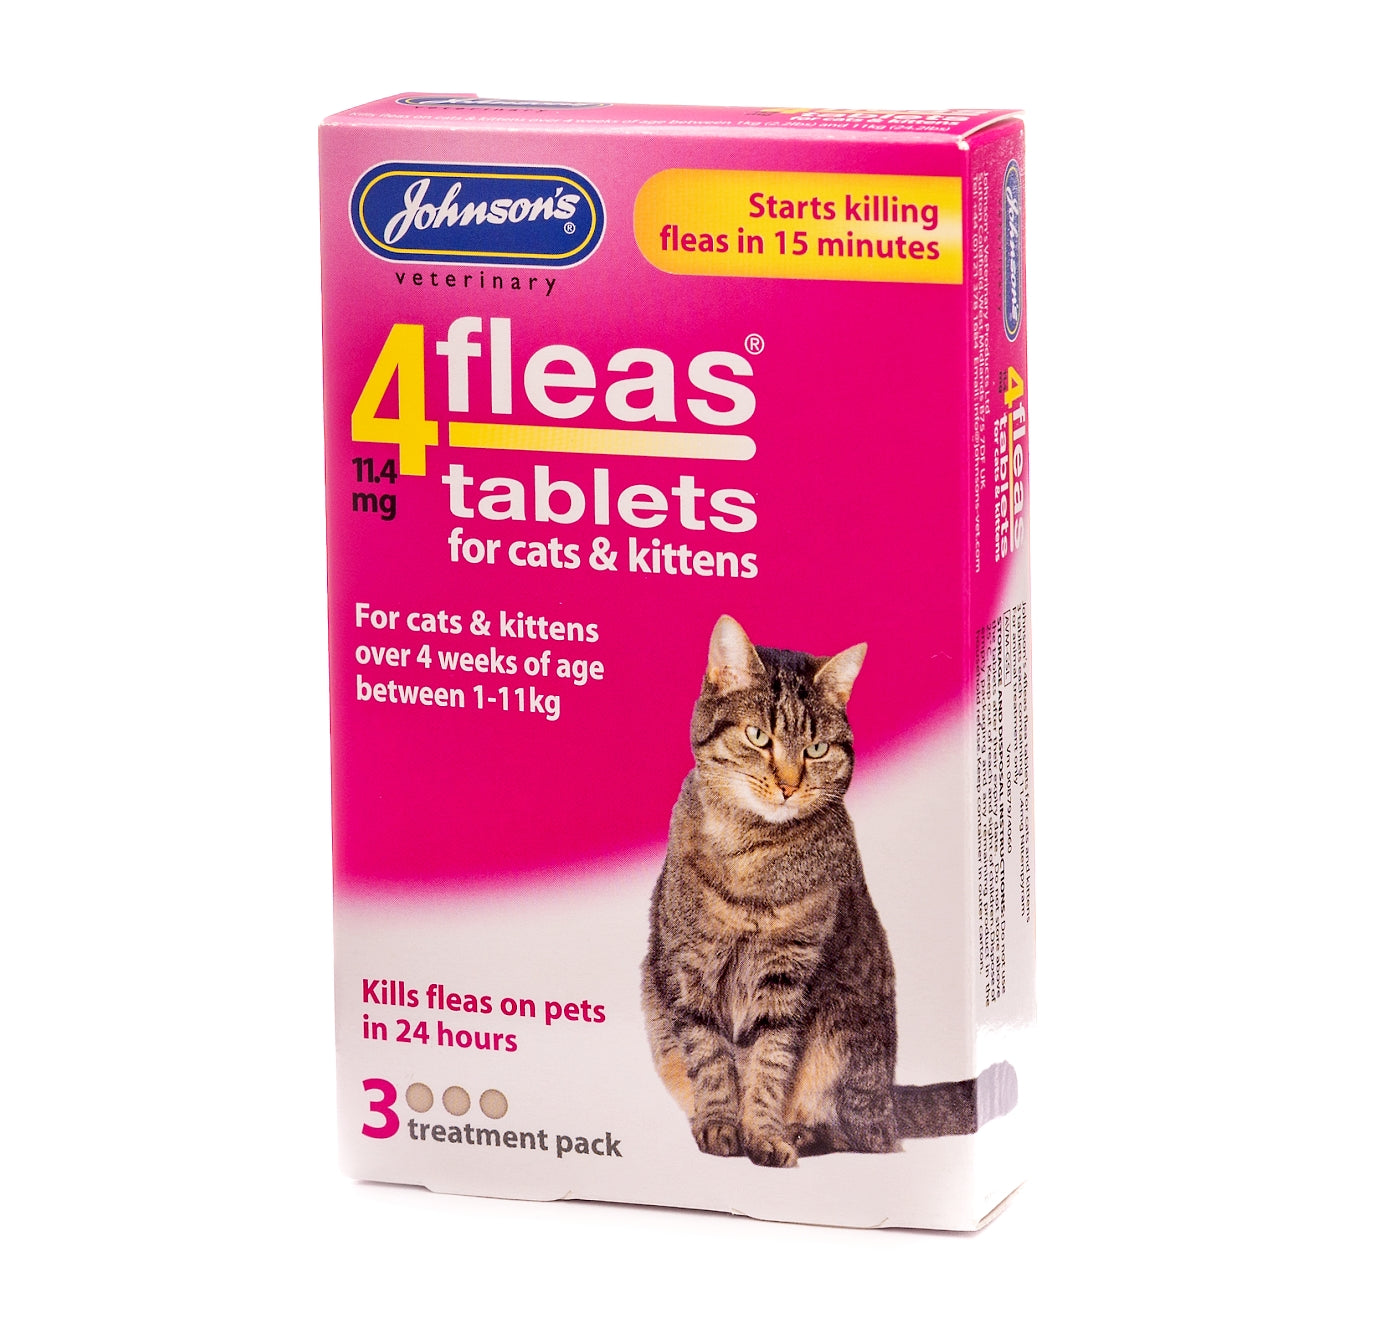 Johnson's - 4fleas Tablets for Cats and Kittens - 3 x tablets